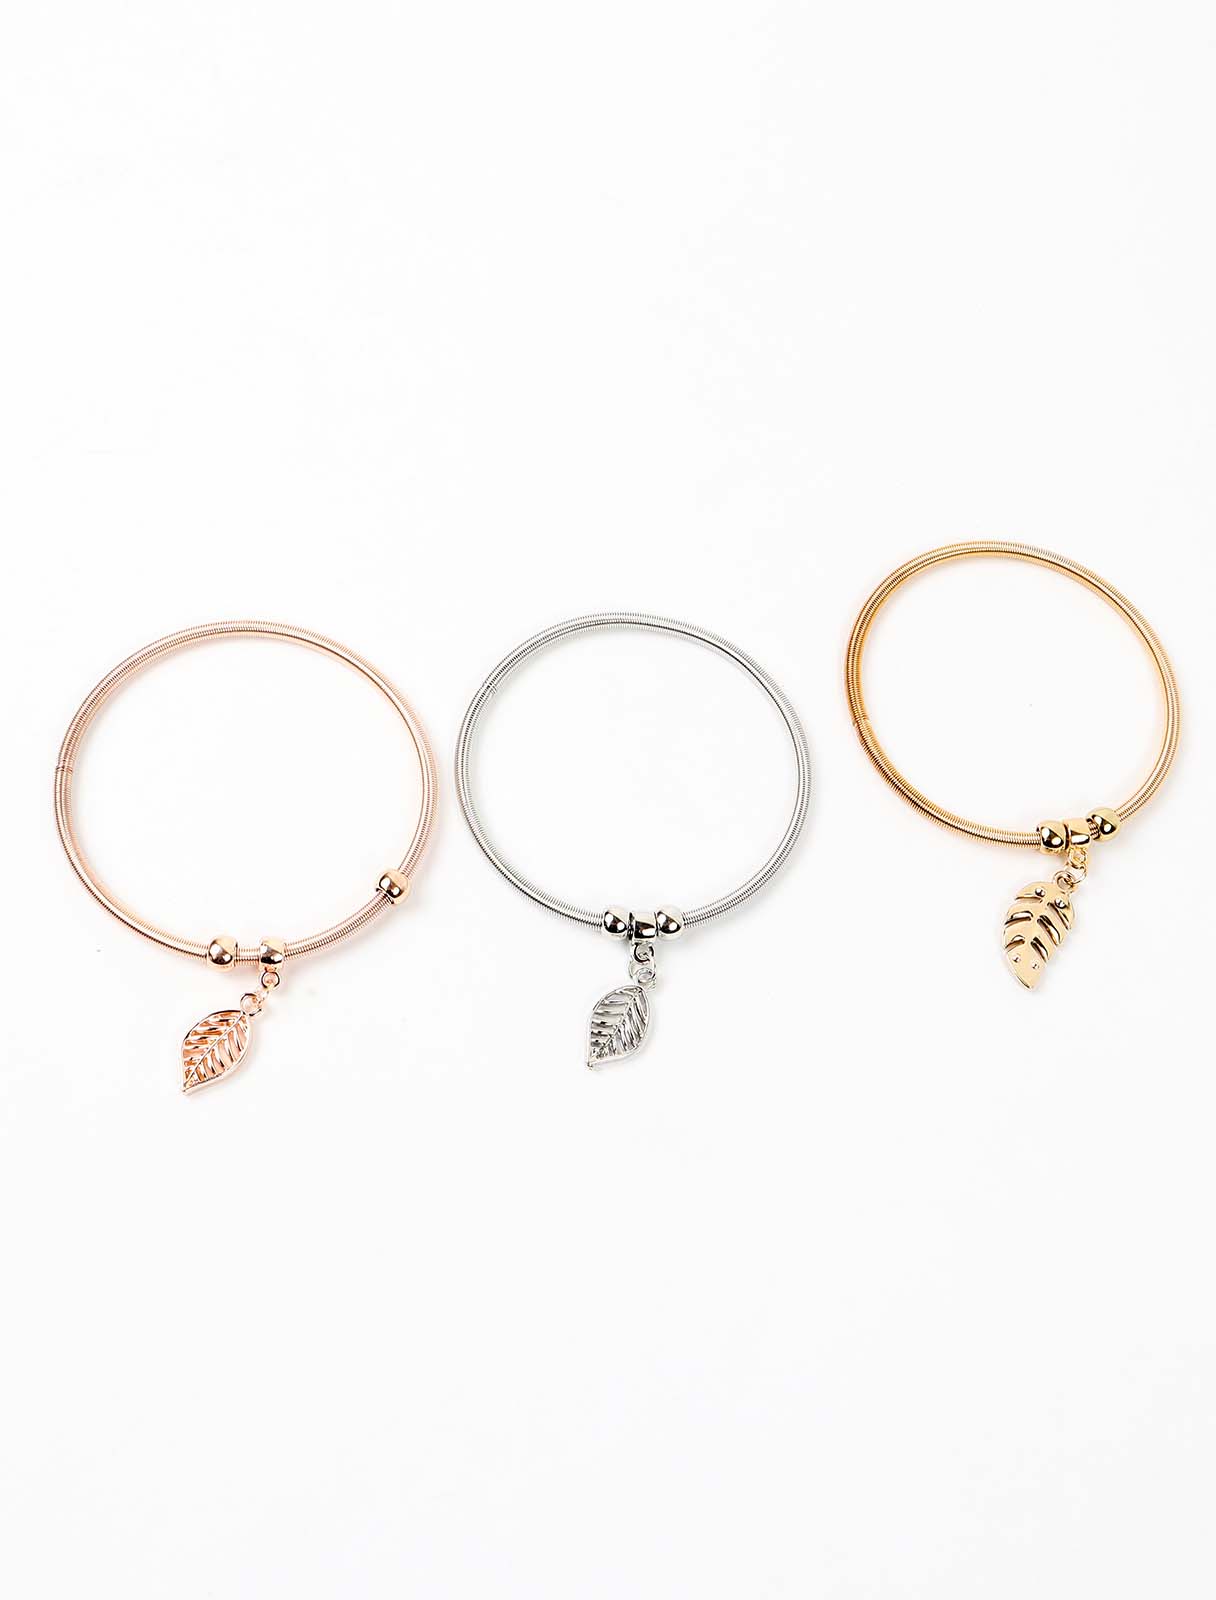 3 pieces bracelet in different colors with a leaf pendant